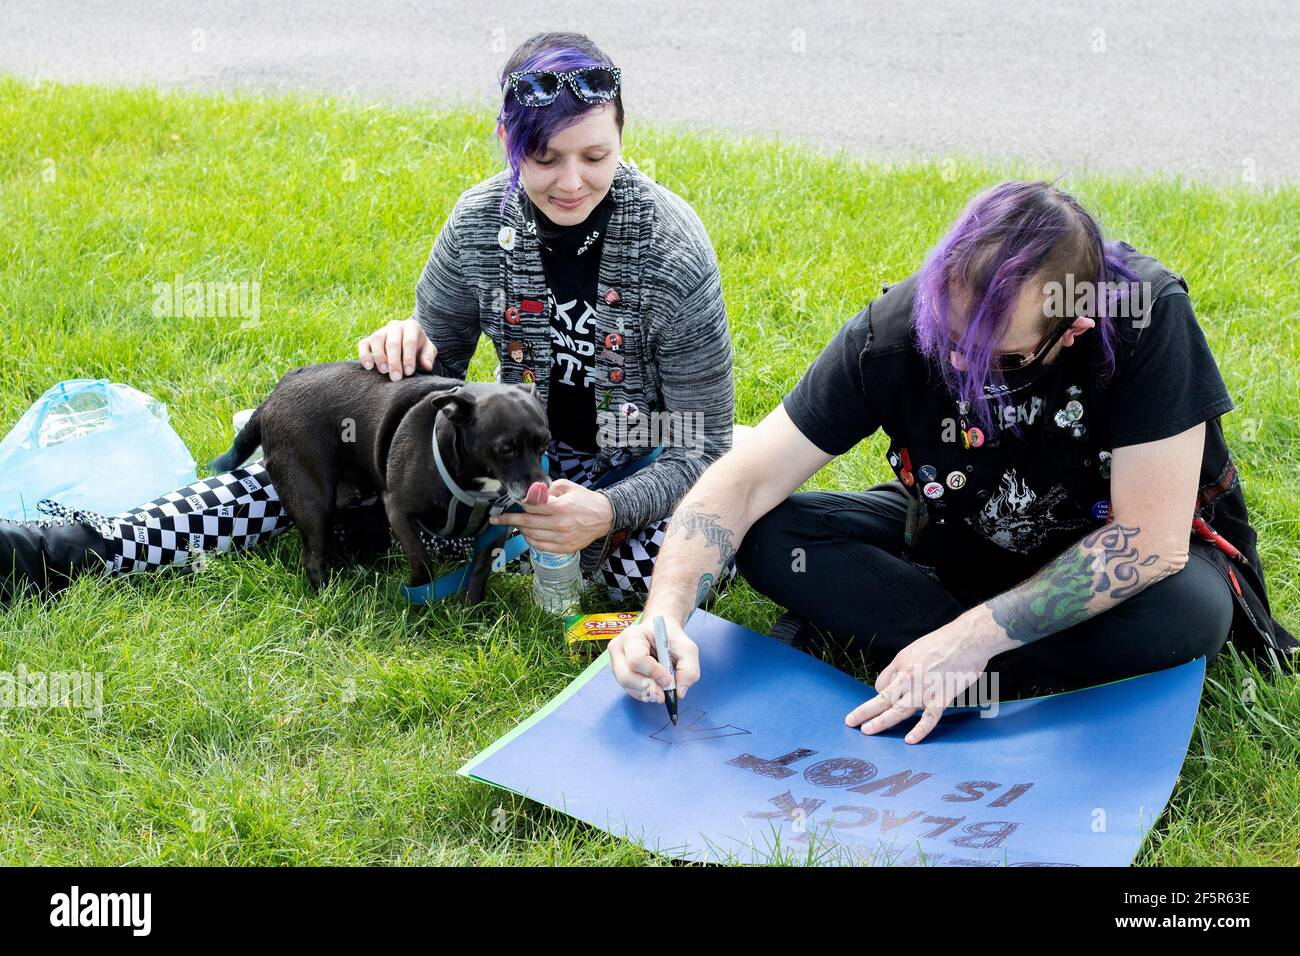 Young adult man and woman with dog making poster at a protest or rally Stock Photo